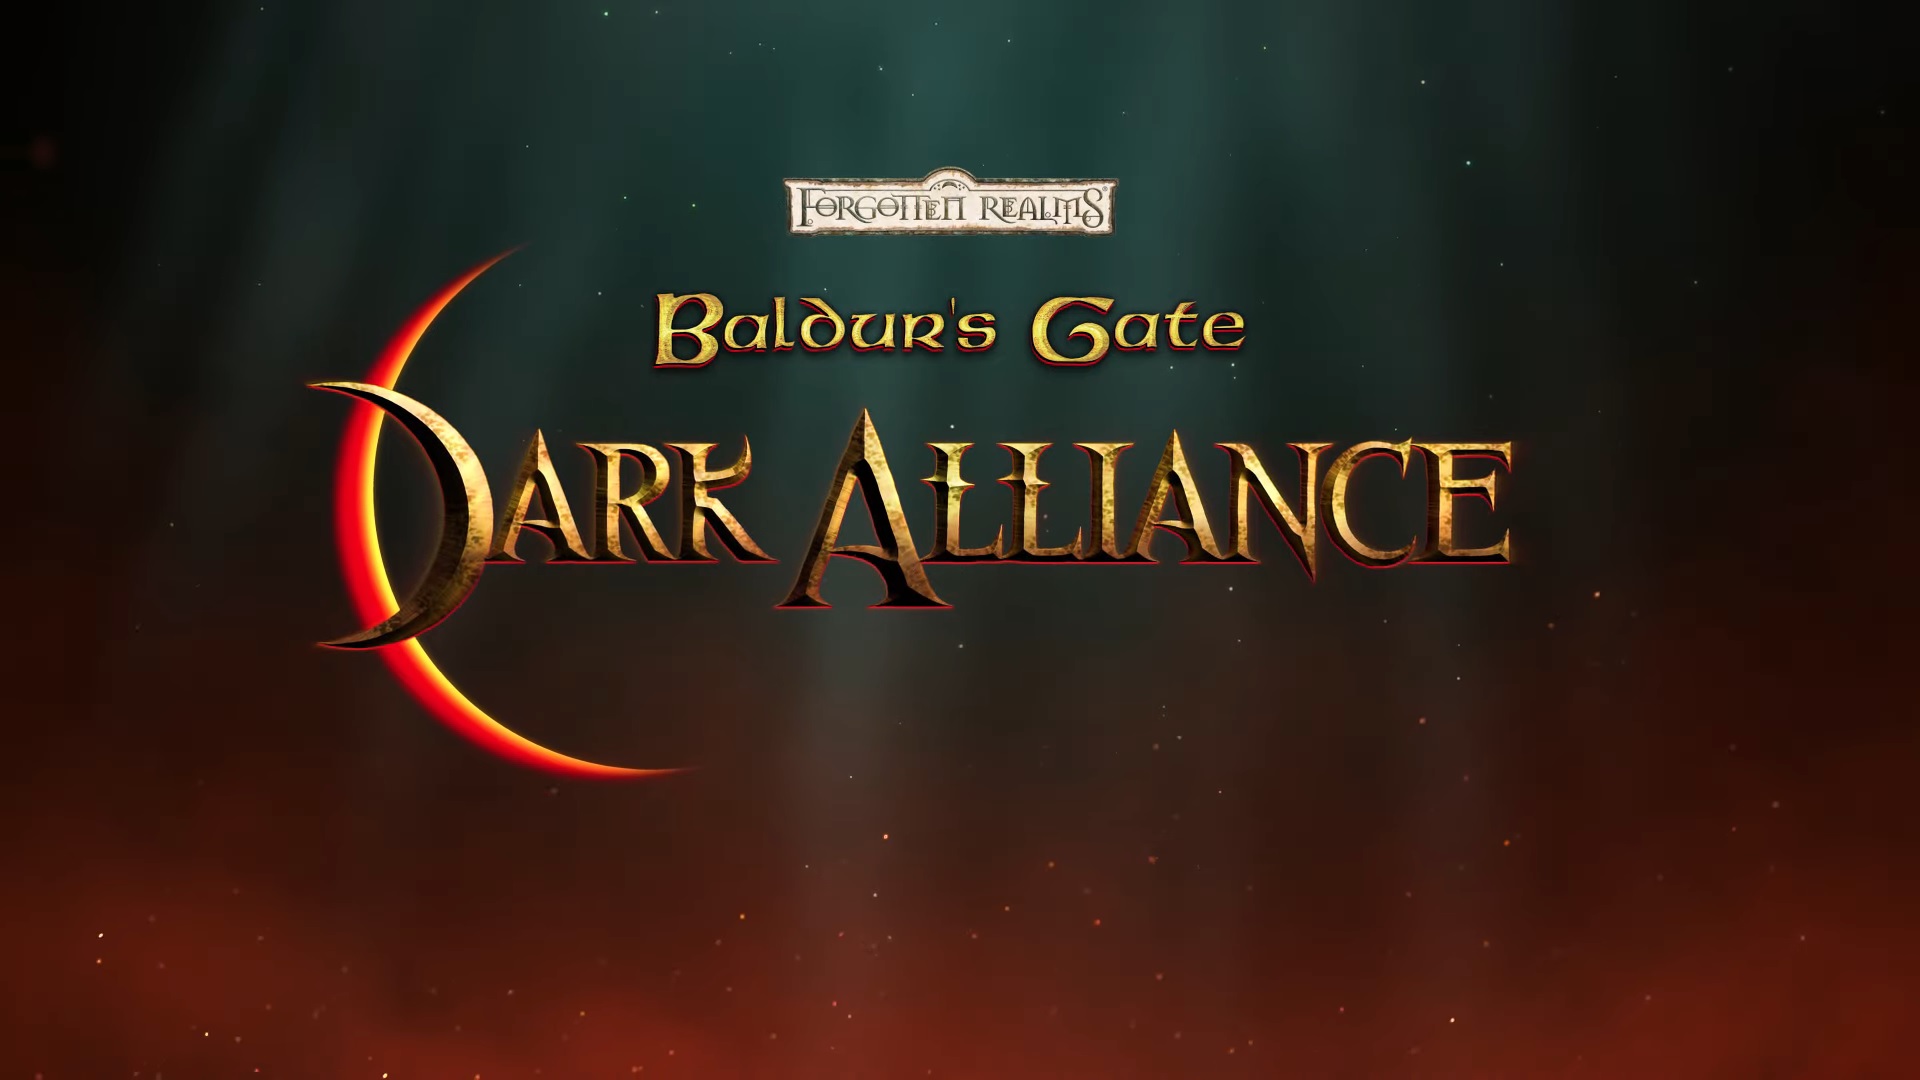 After 20 years, Baldur’s Gate: Dark Alliance is finally available on PC